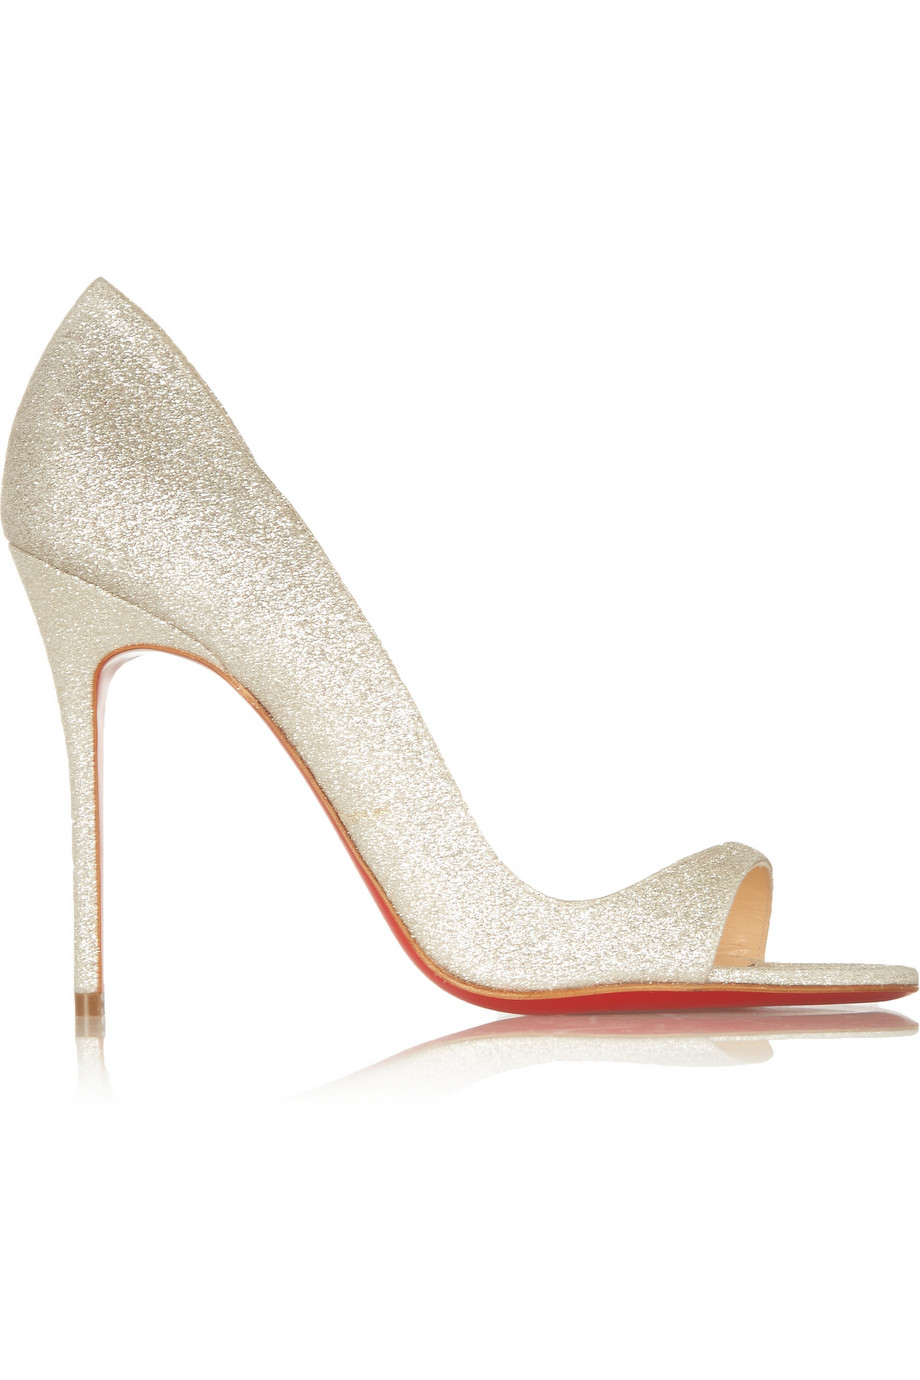 Christian louboutin Toboggan Glitter Leather Sandals in Silver | Lyst